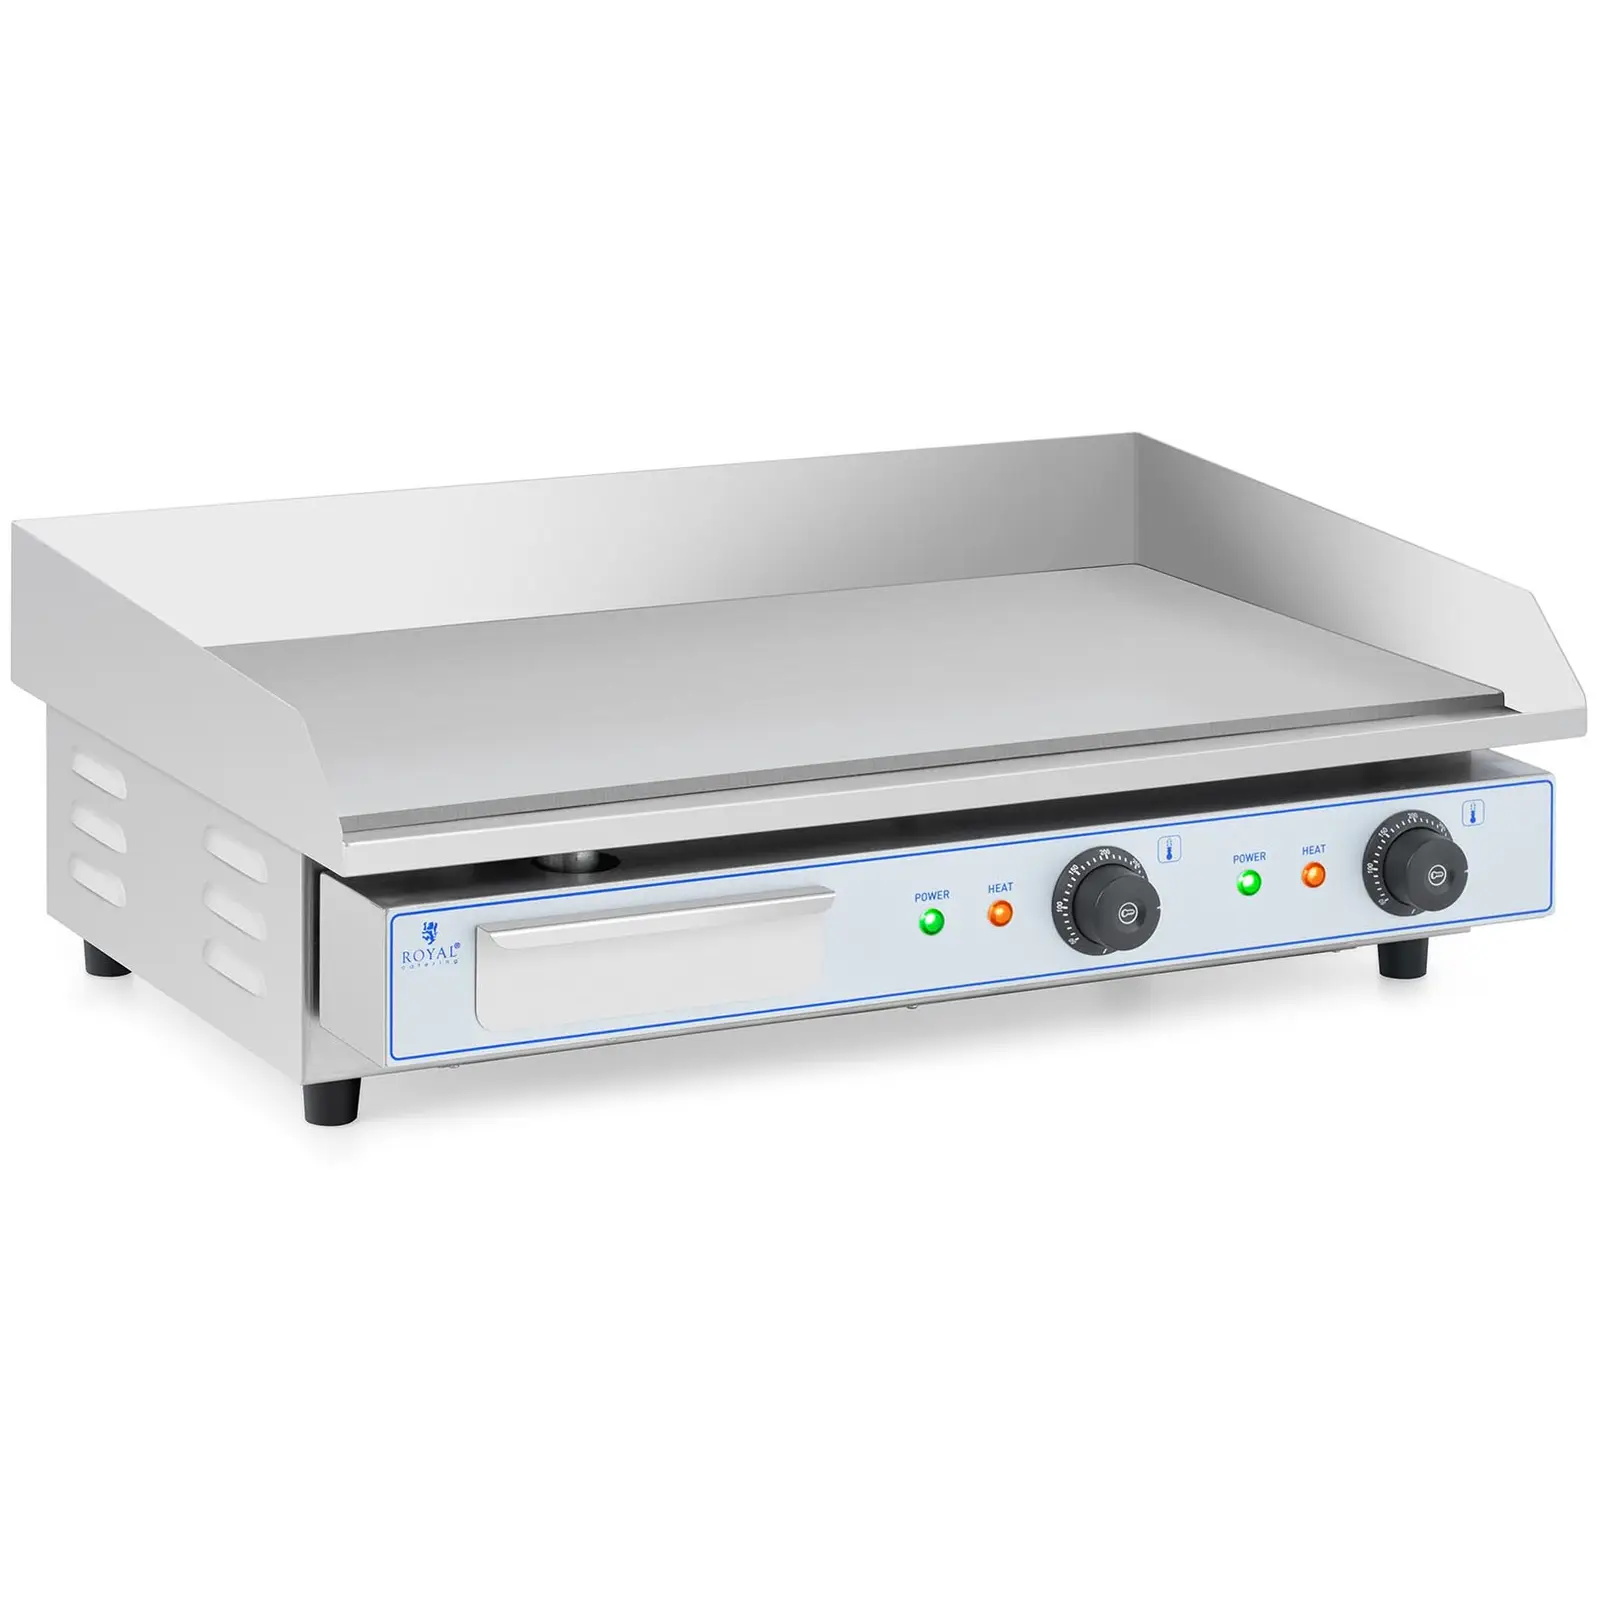 Plancha eléctrica fry-top doble - 730 x 400 mm - Royal Catering - Flat - 2 x 2,200 W